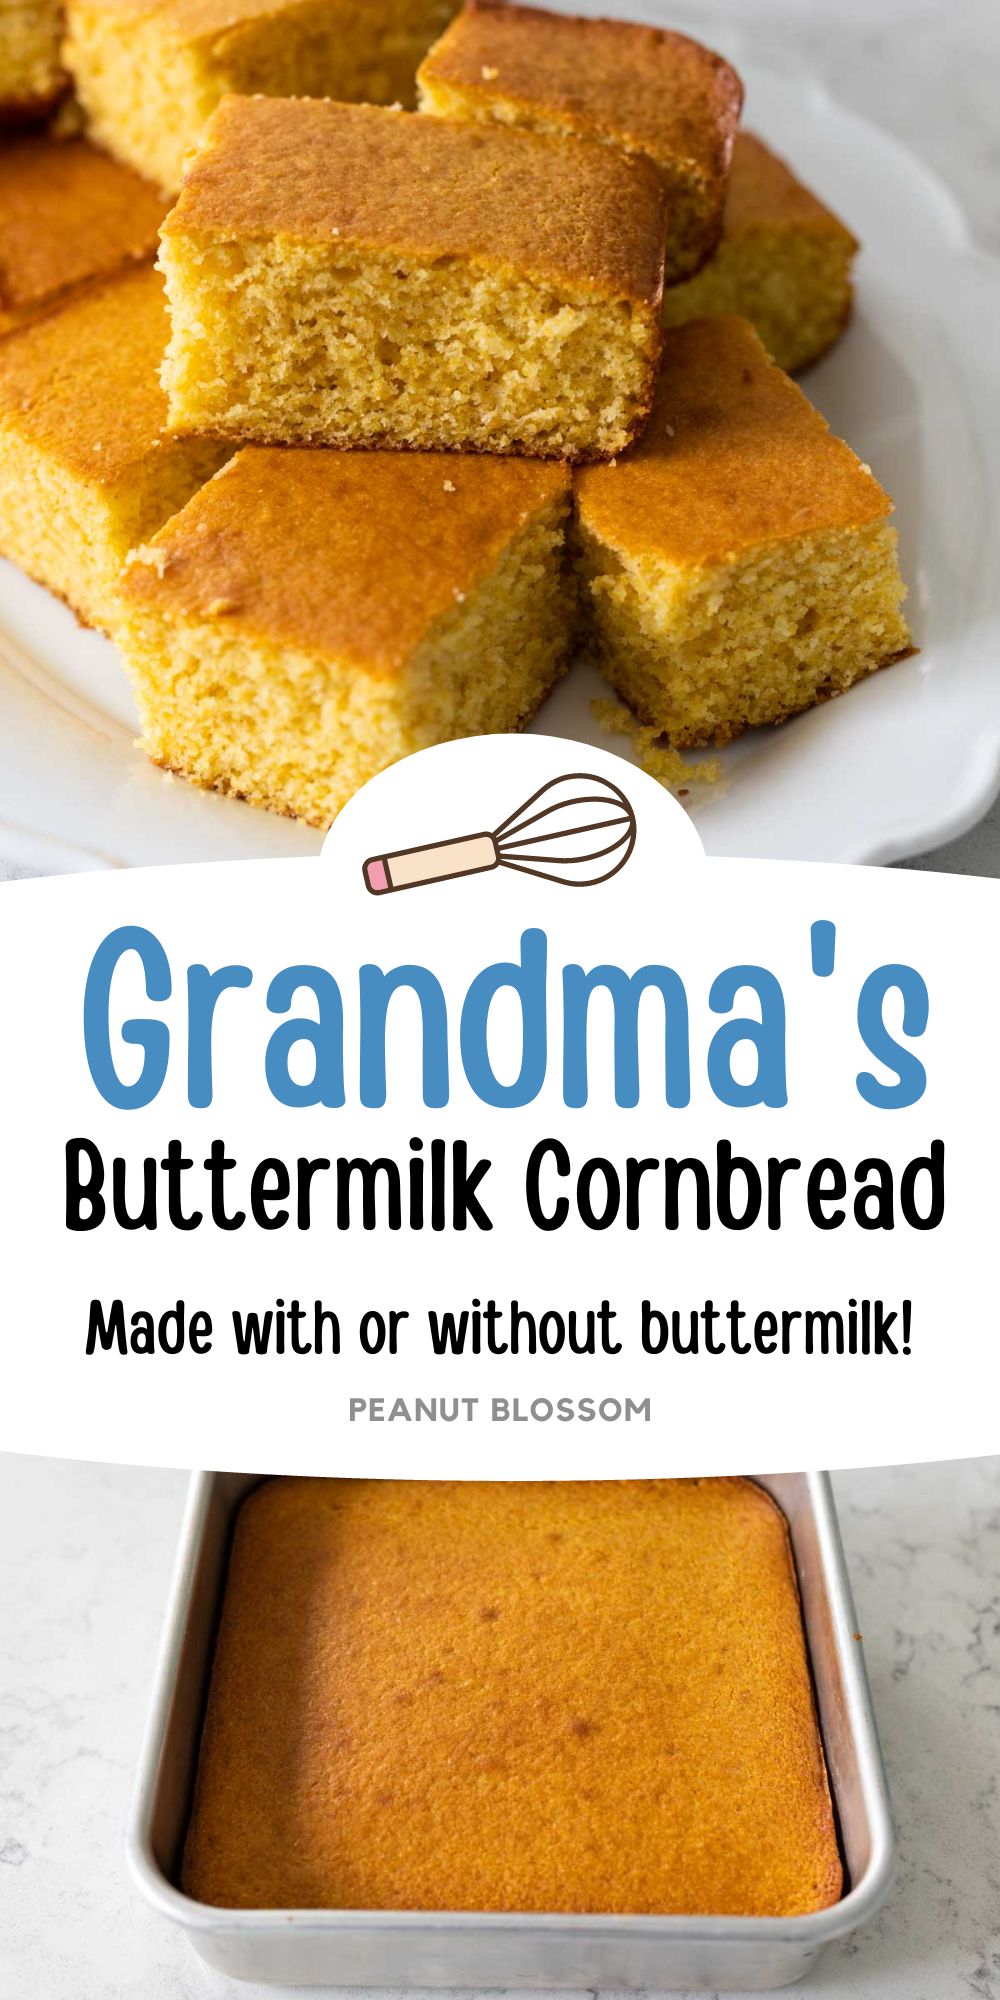 Photo collage shows the squares of Grandma's cornbread on the top and the baking pan of buttermilk cornbread below.